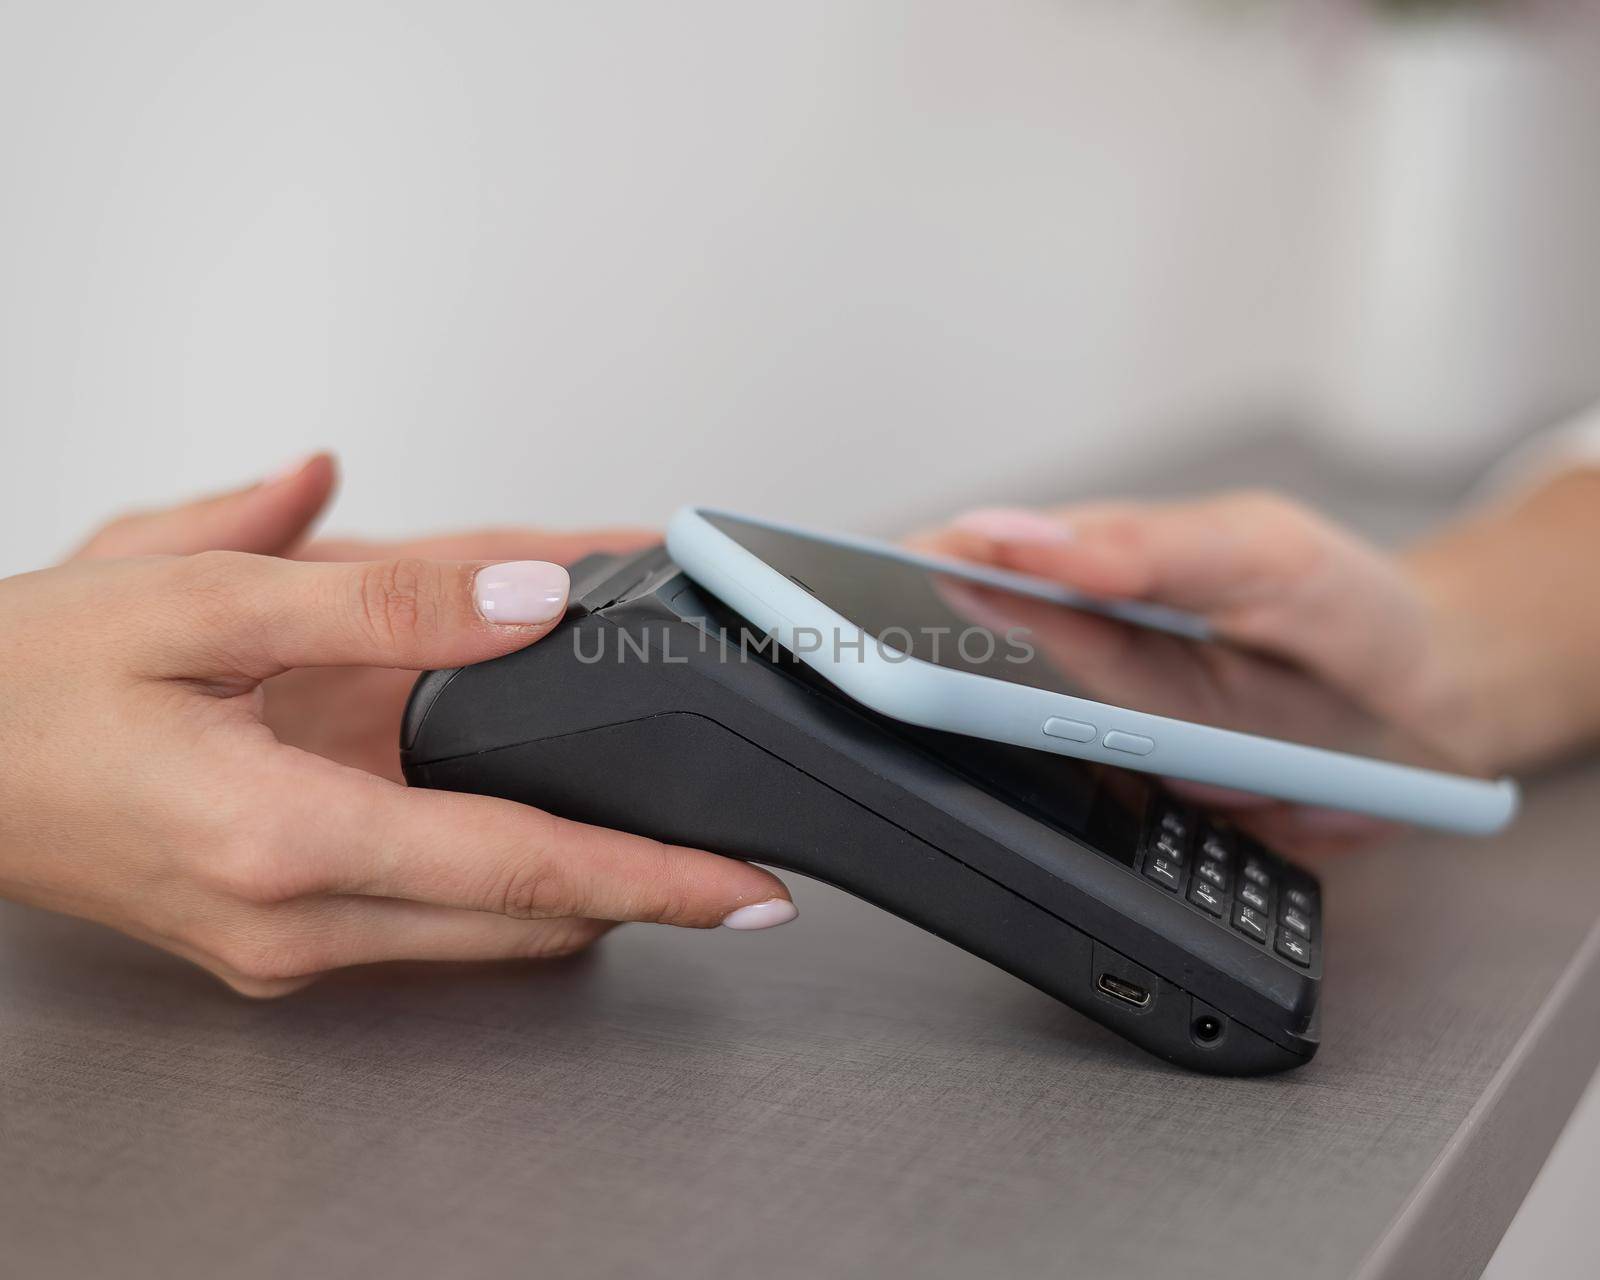 A woman pays using a non -contact payment of the NFC used by a smartphone. by mrwed54